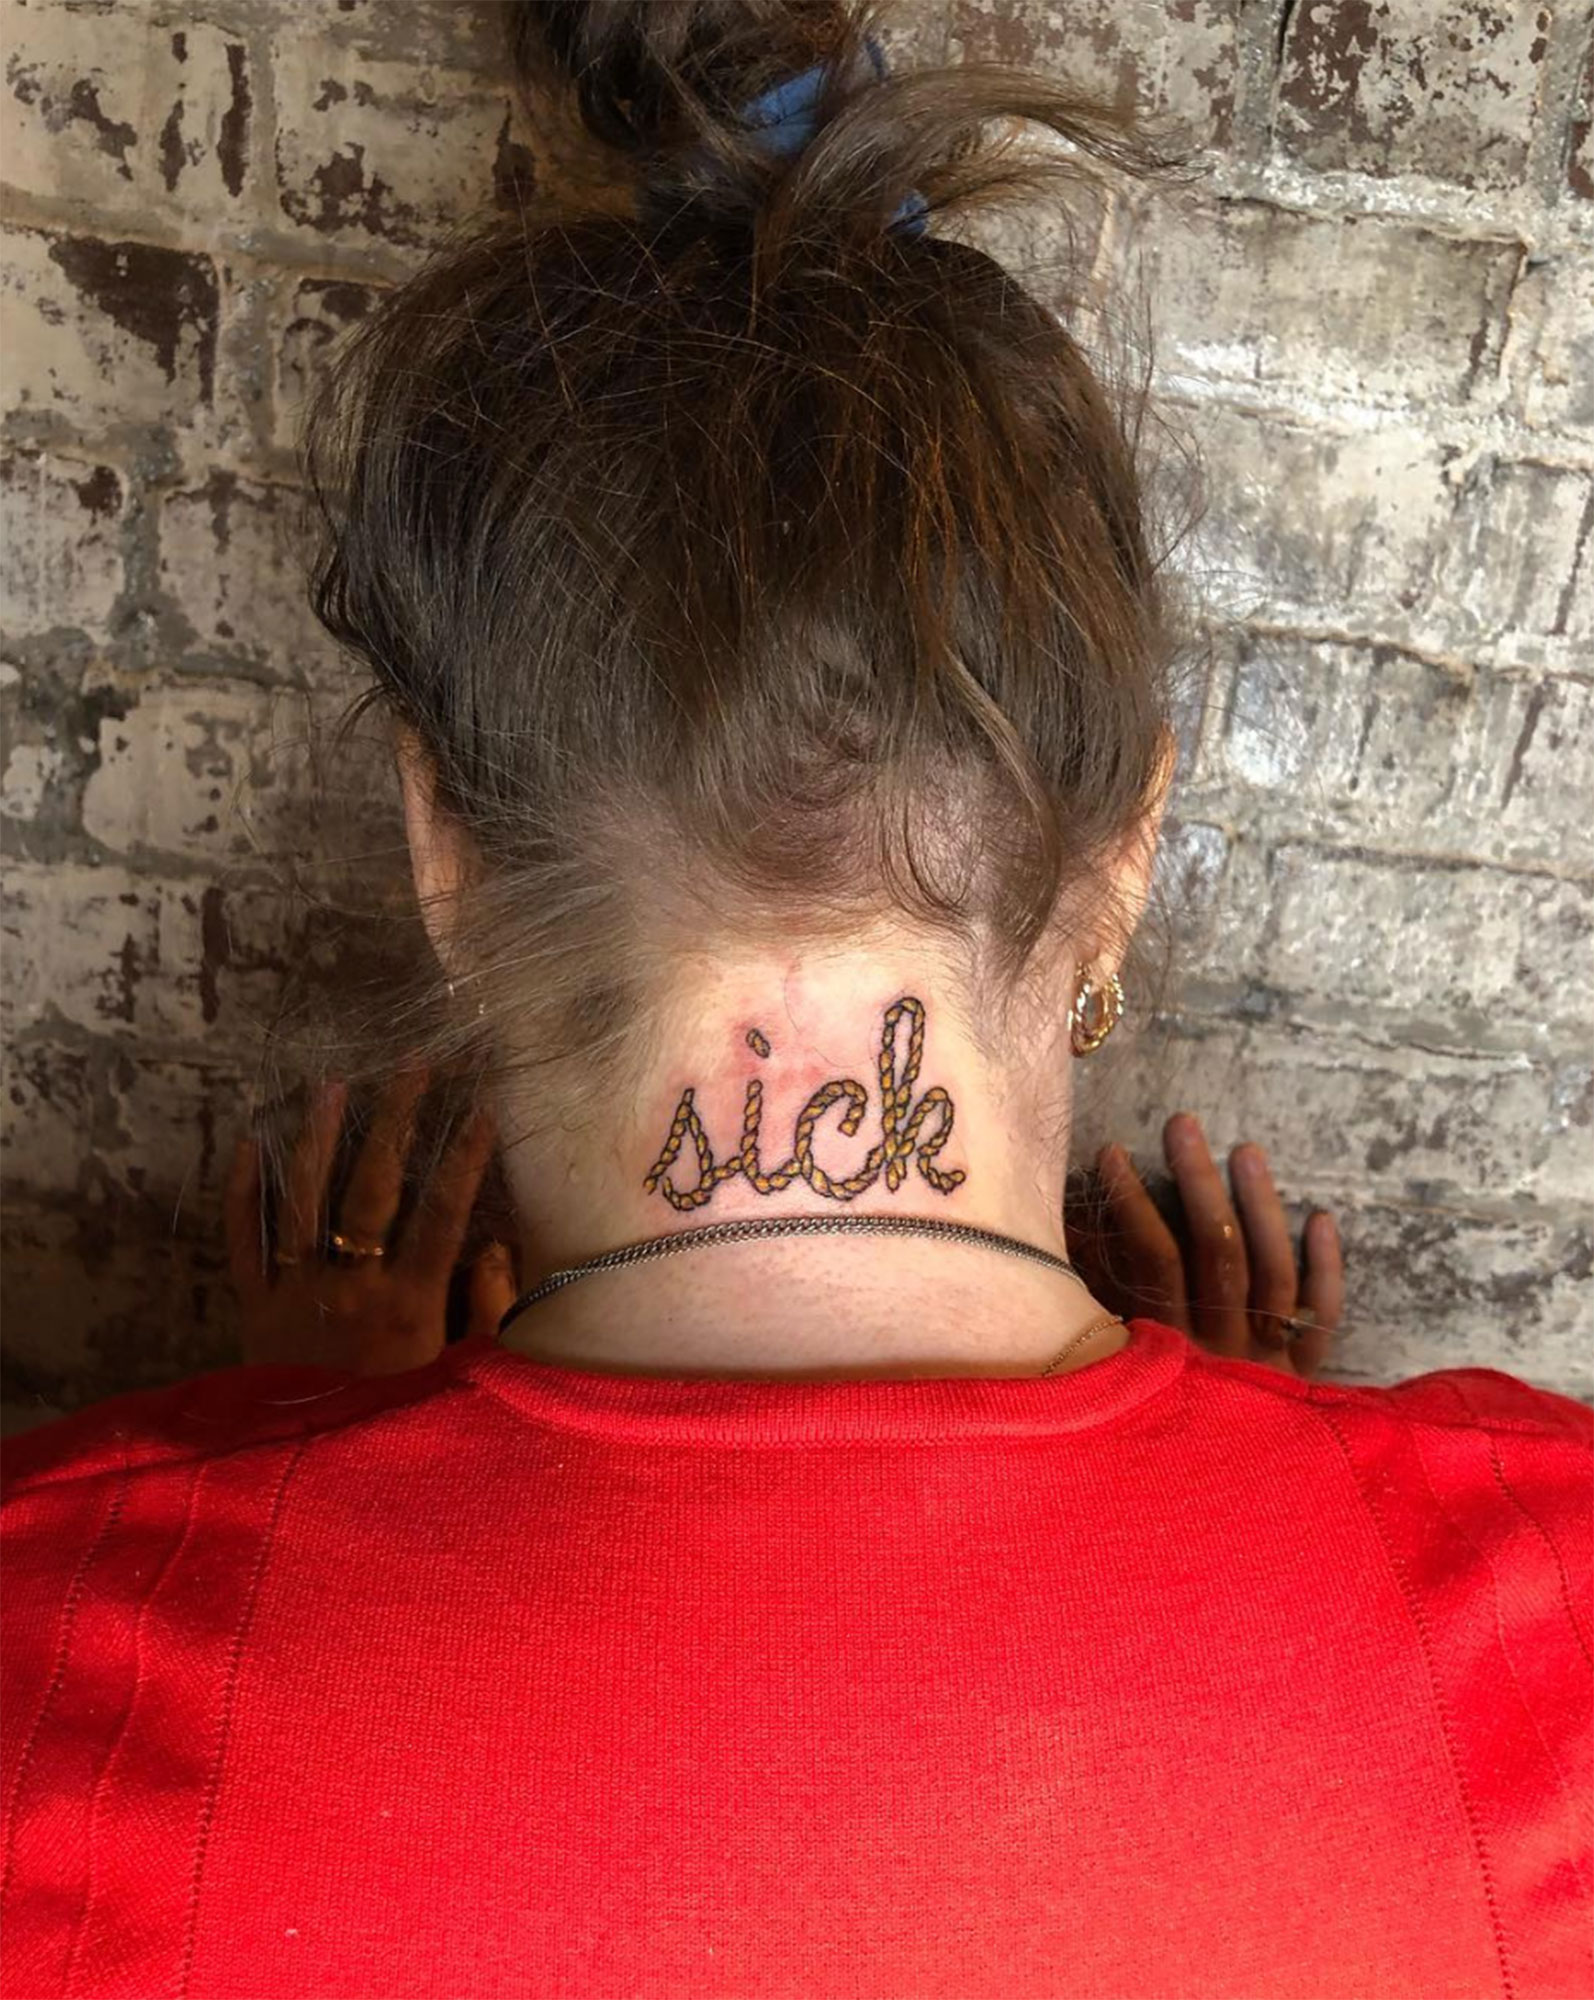 Here are all of the celebrity neck tattoos that may inspire your next ink